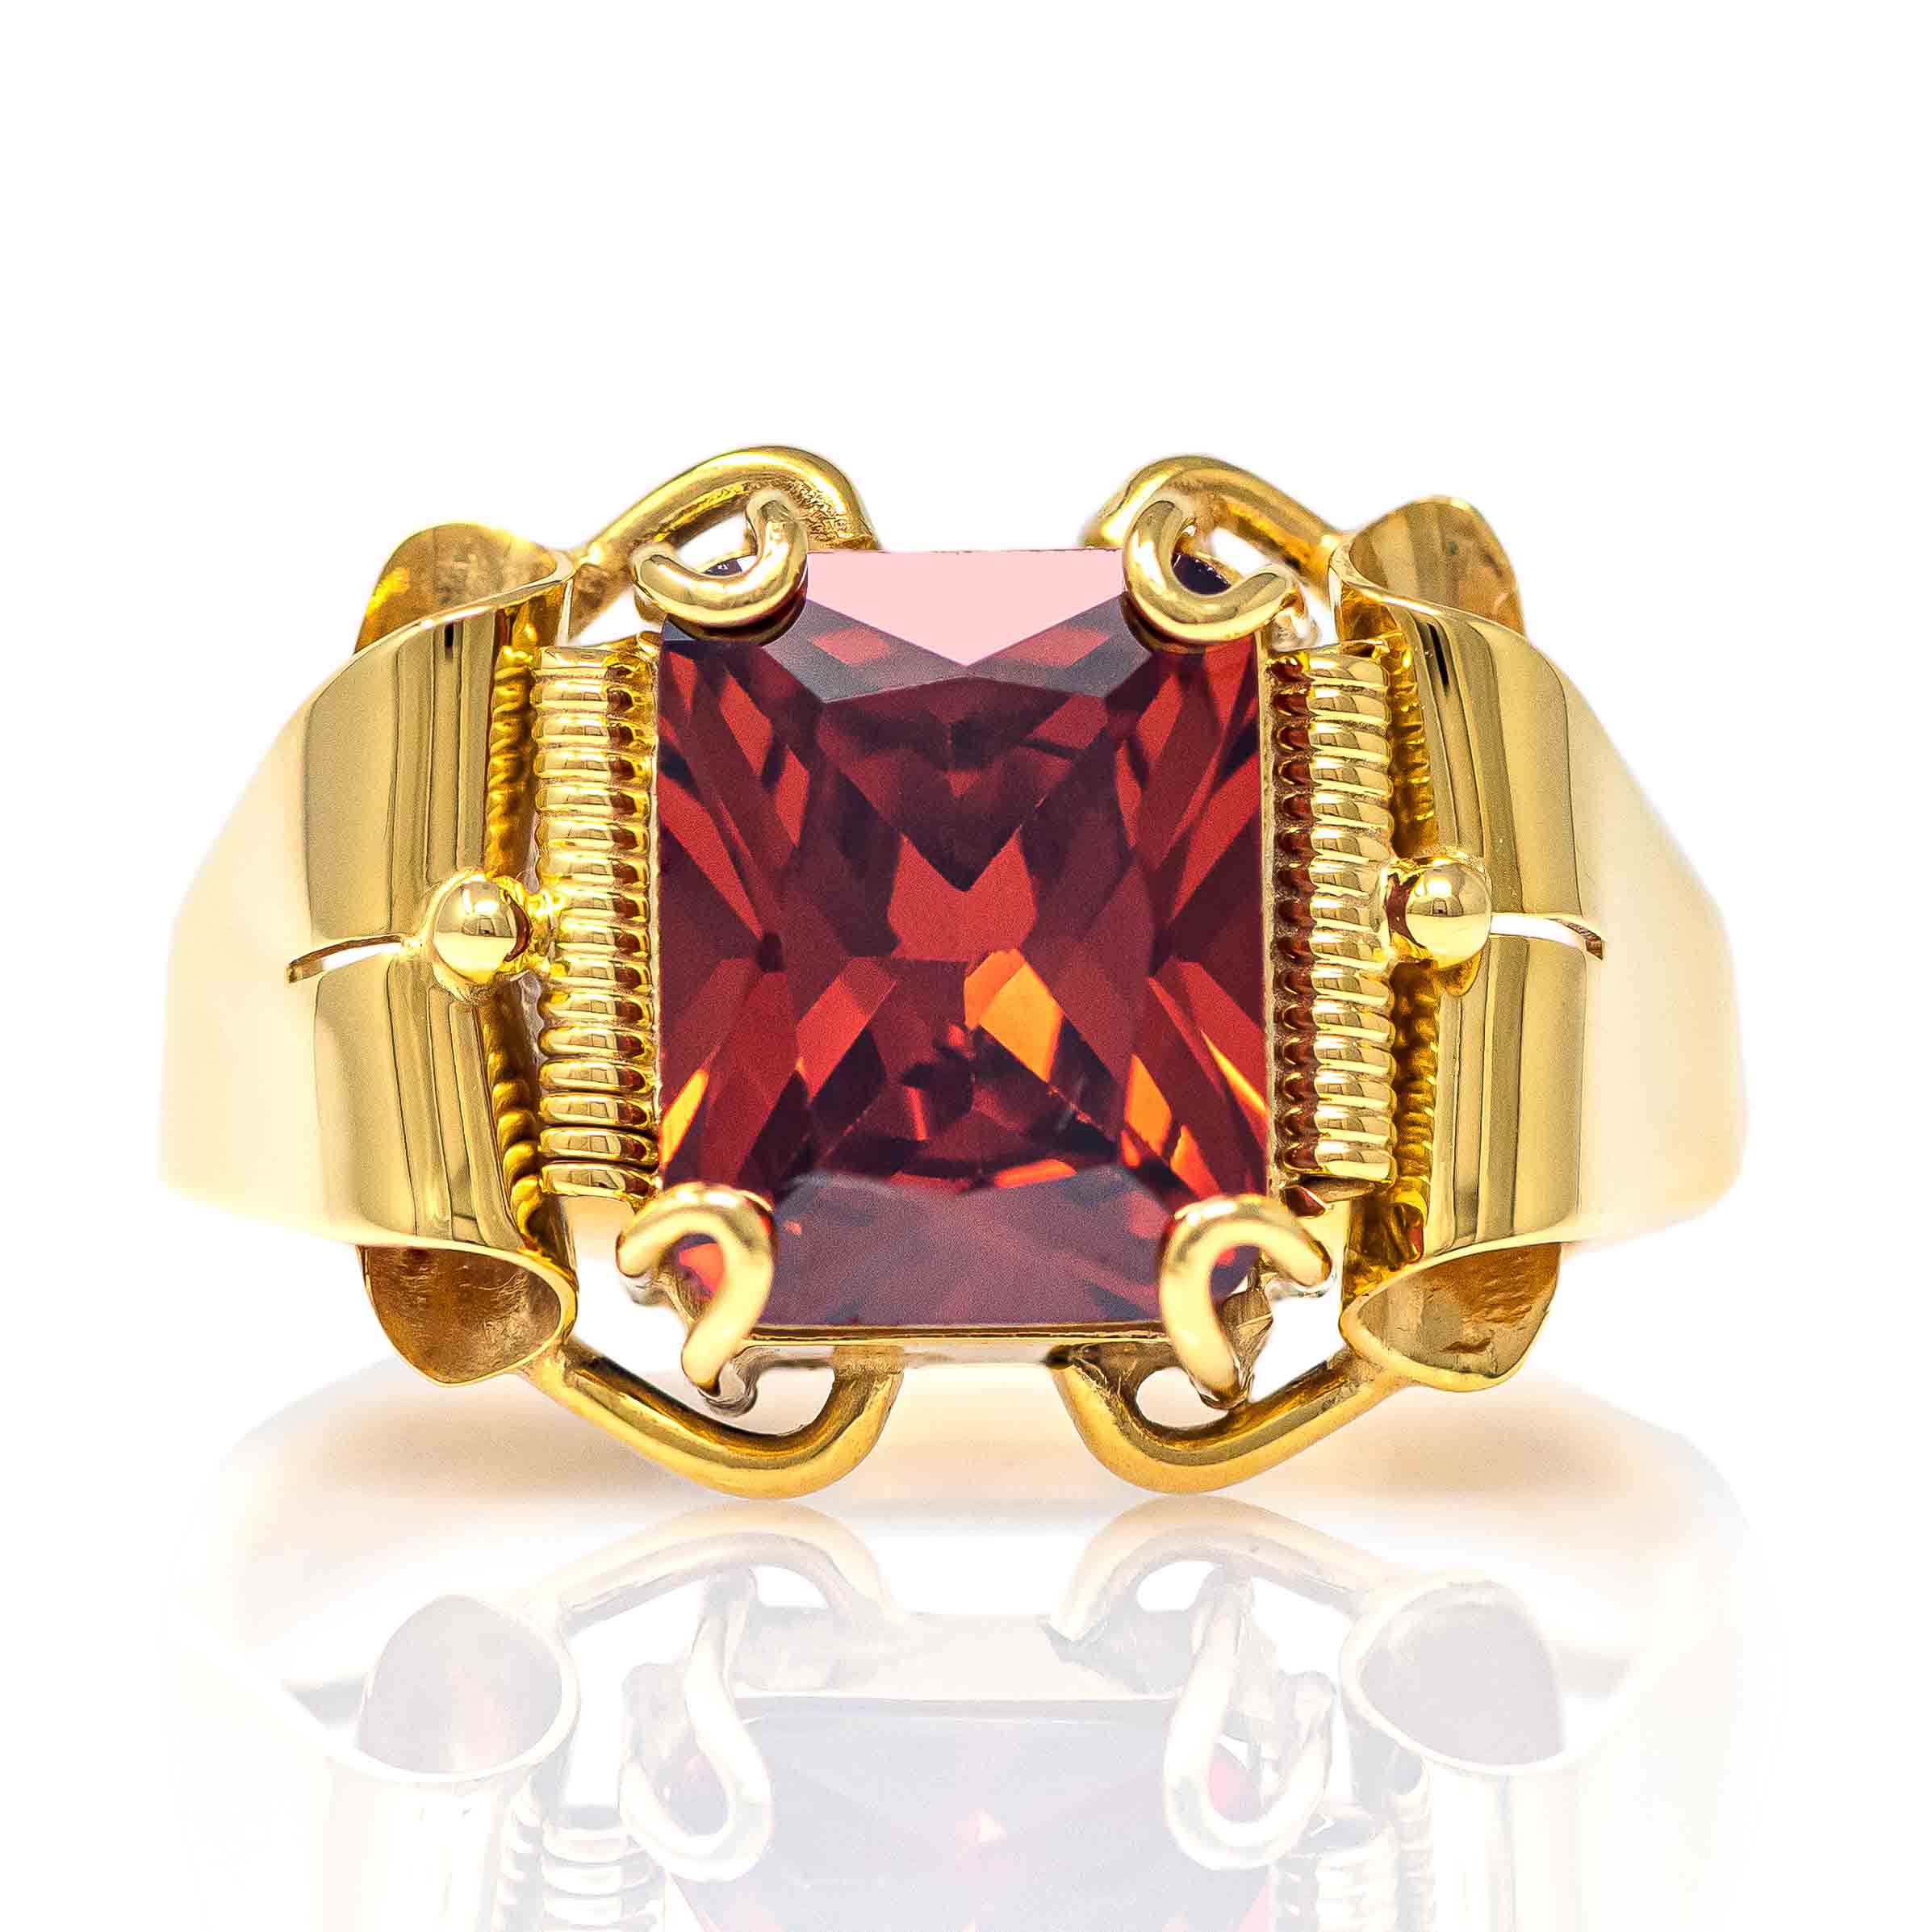 Handmade Yellow Gold 9kt Ring with Synthetic Garnet